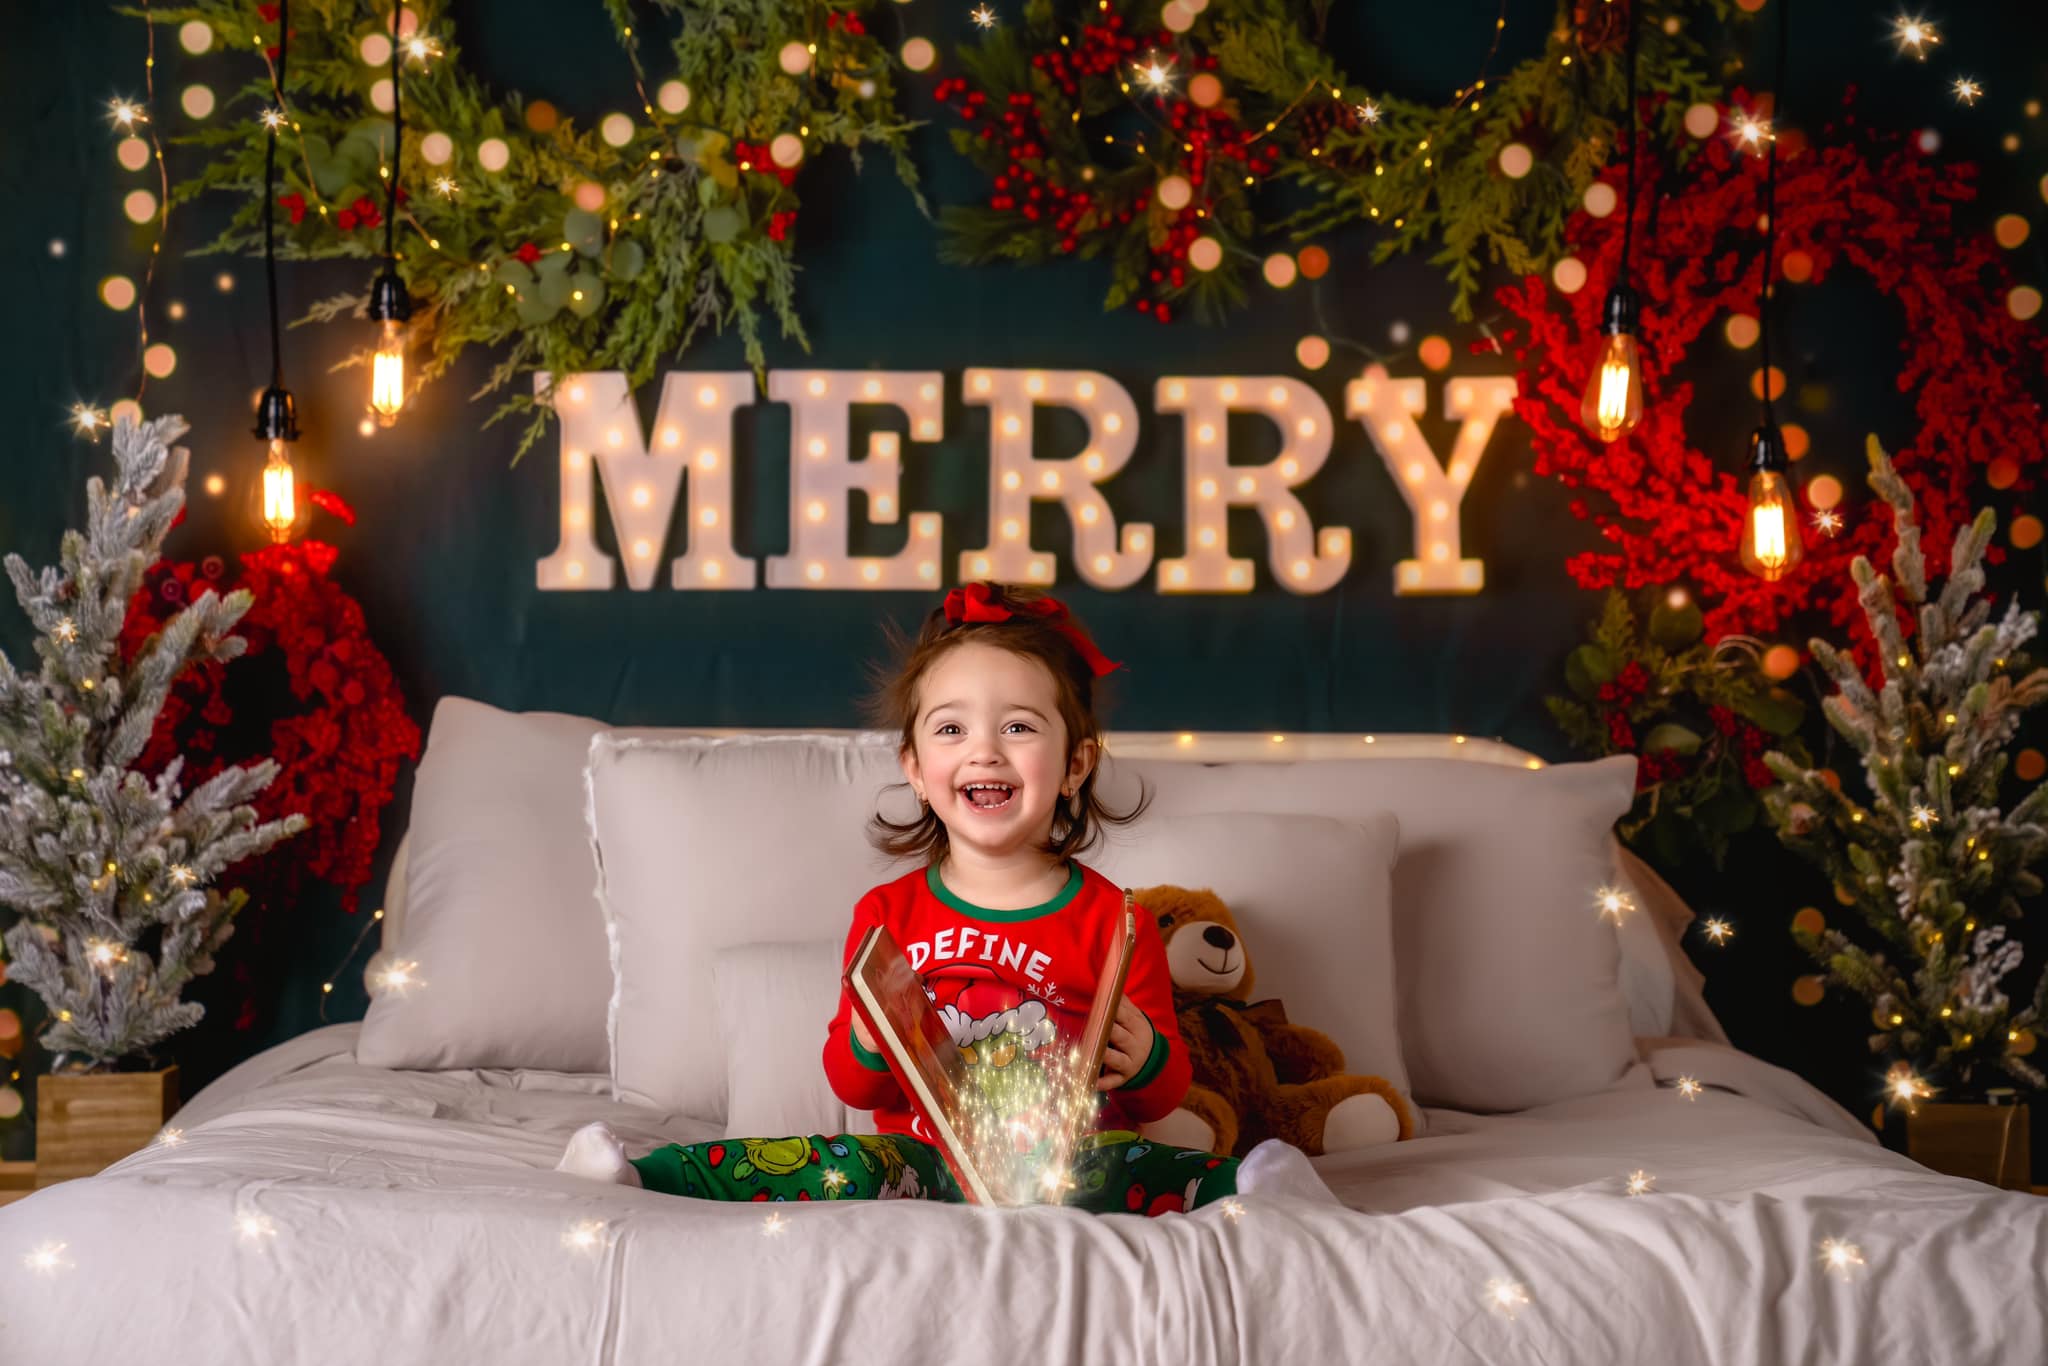 Kate Merry Christmas Backdrop Sparkle Headboard Designed By Mandy Ringe Photography